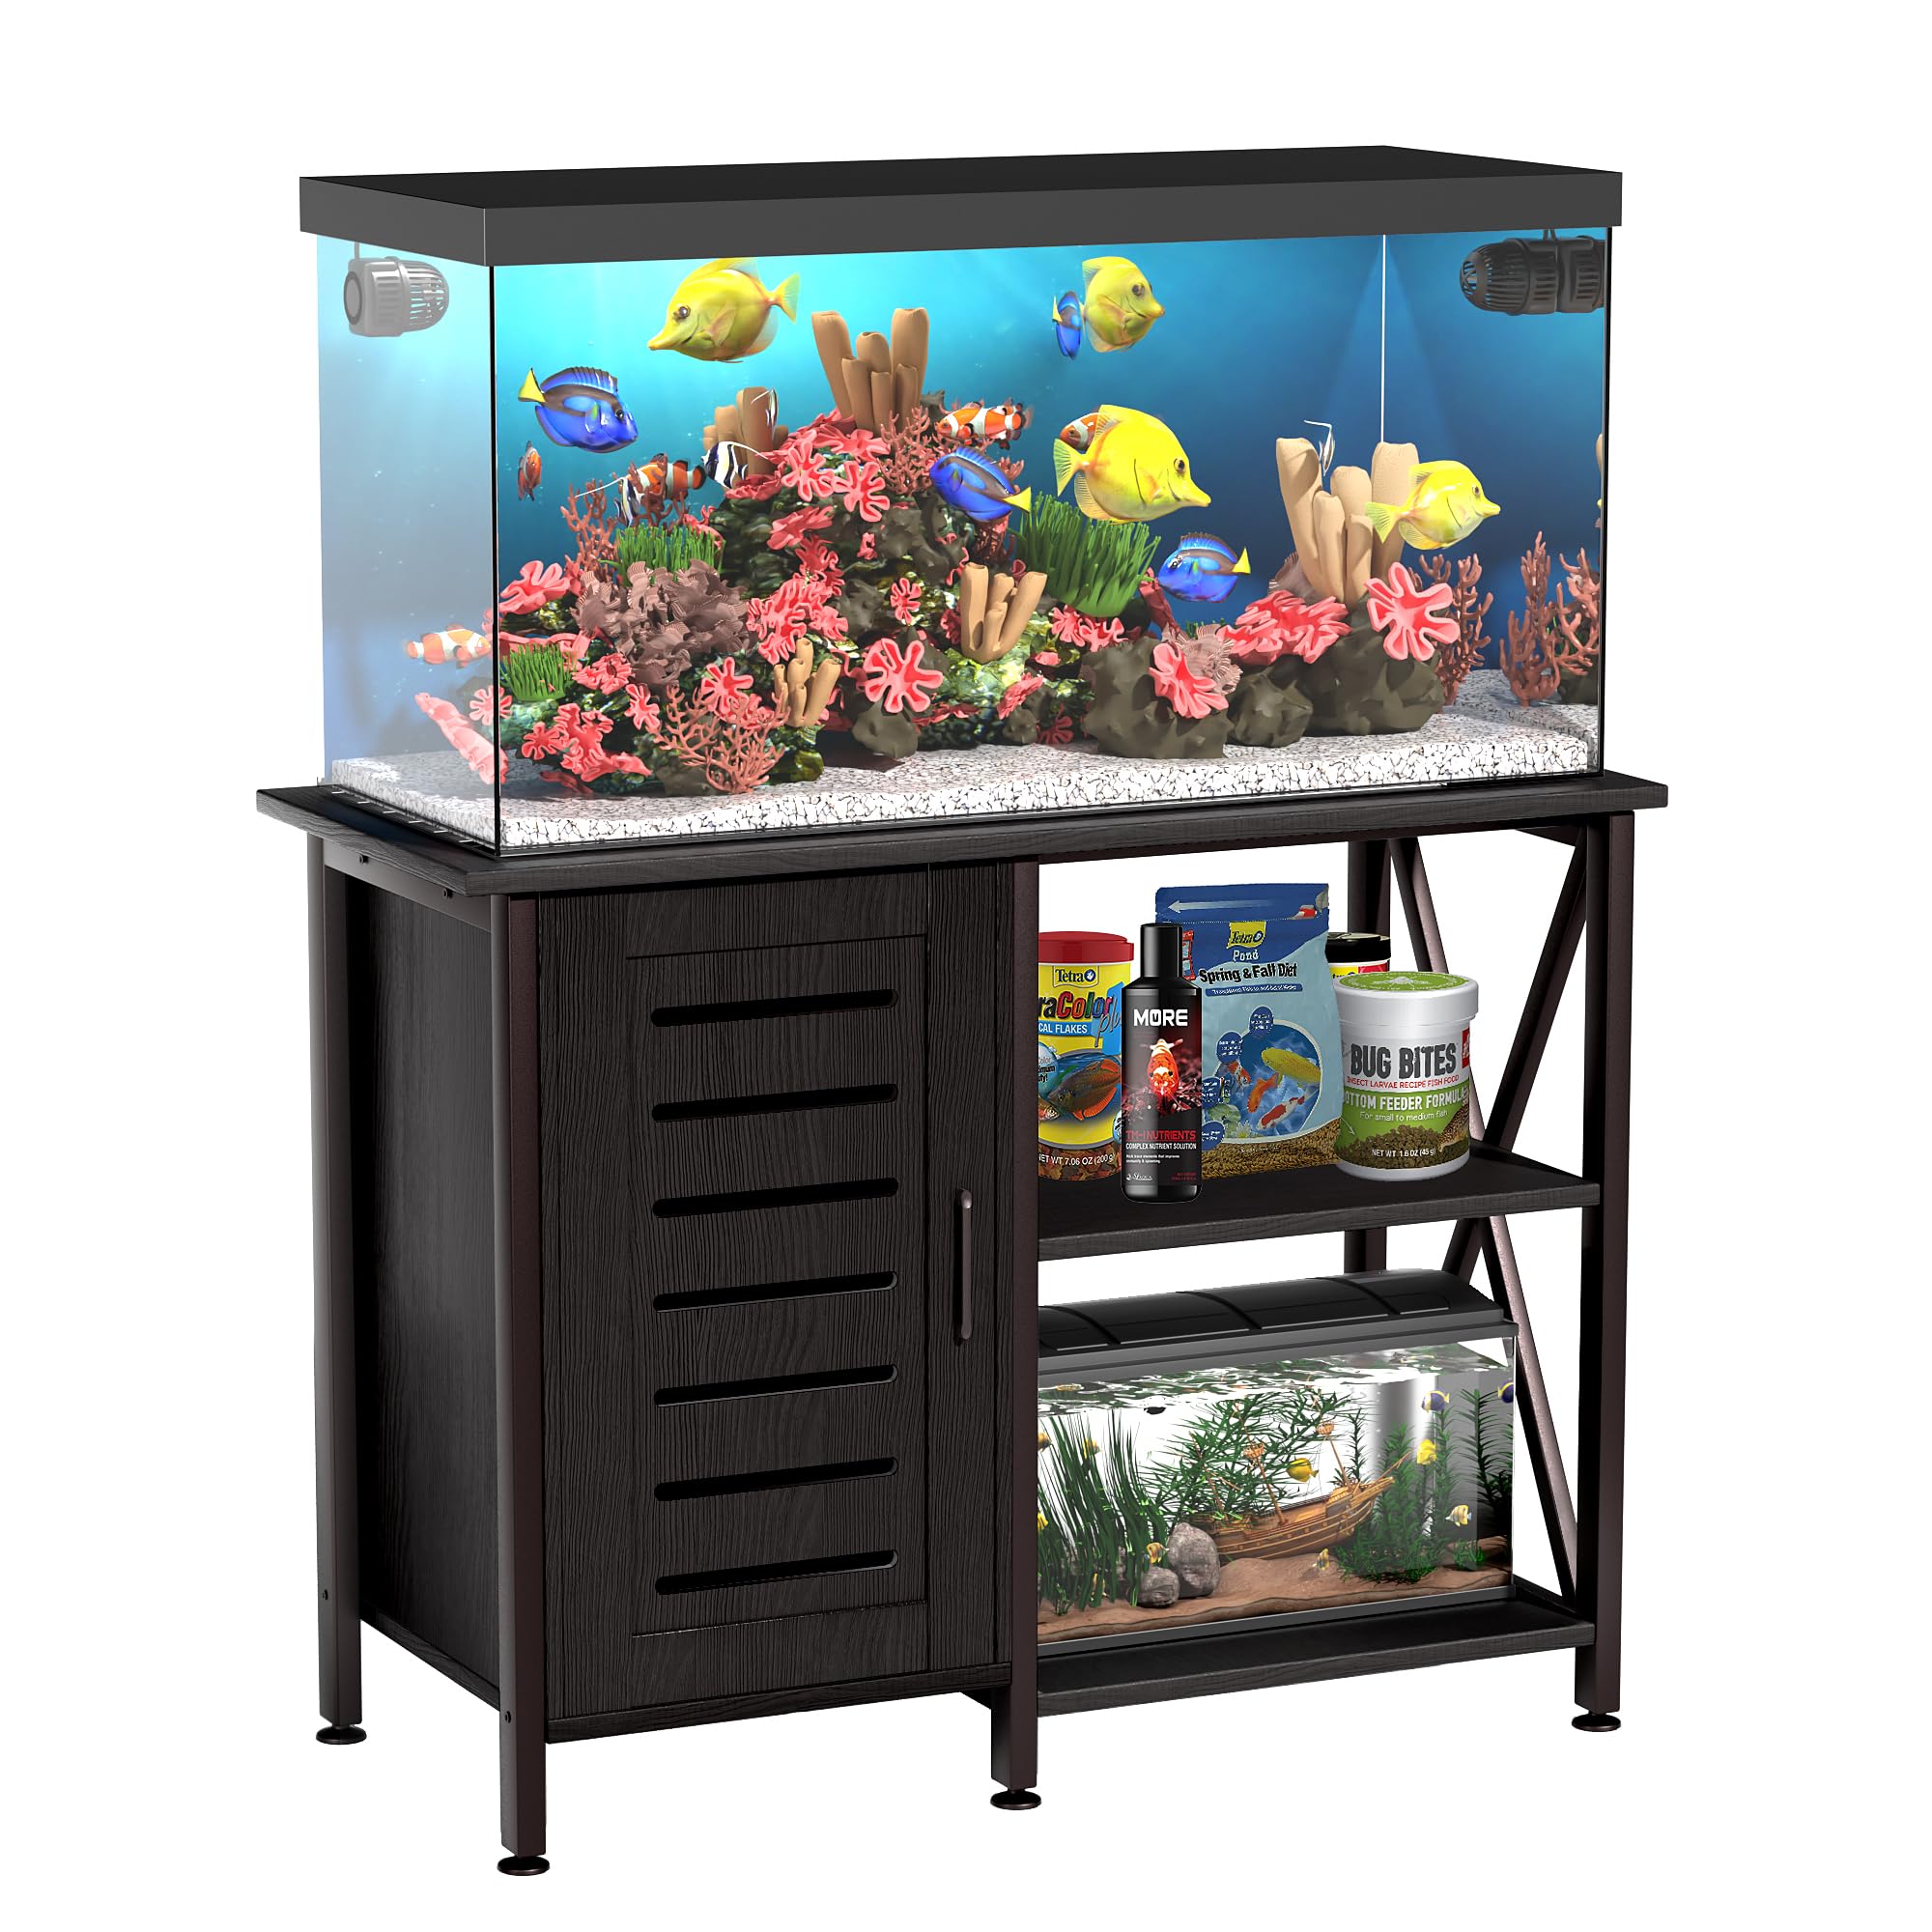 Herture 40-50 Gallon Fish Tank Stand with Cabinet Storage